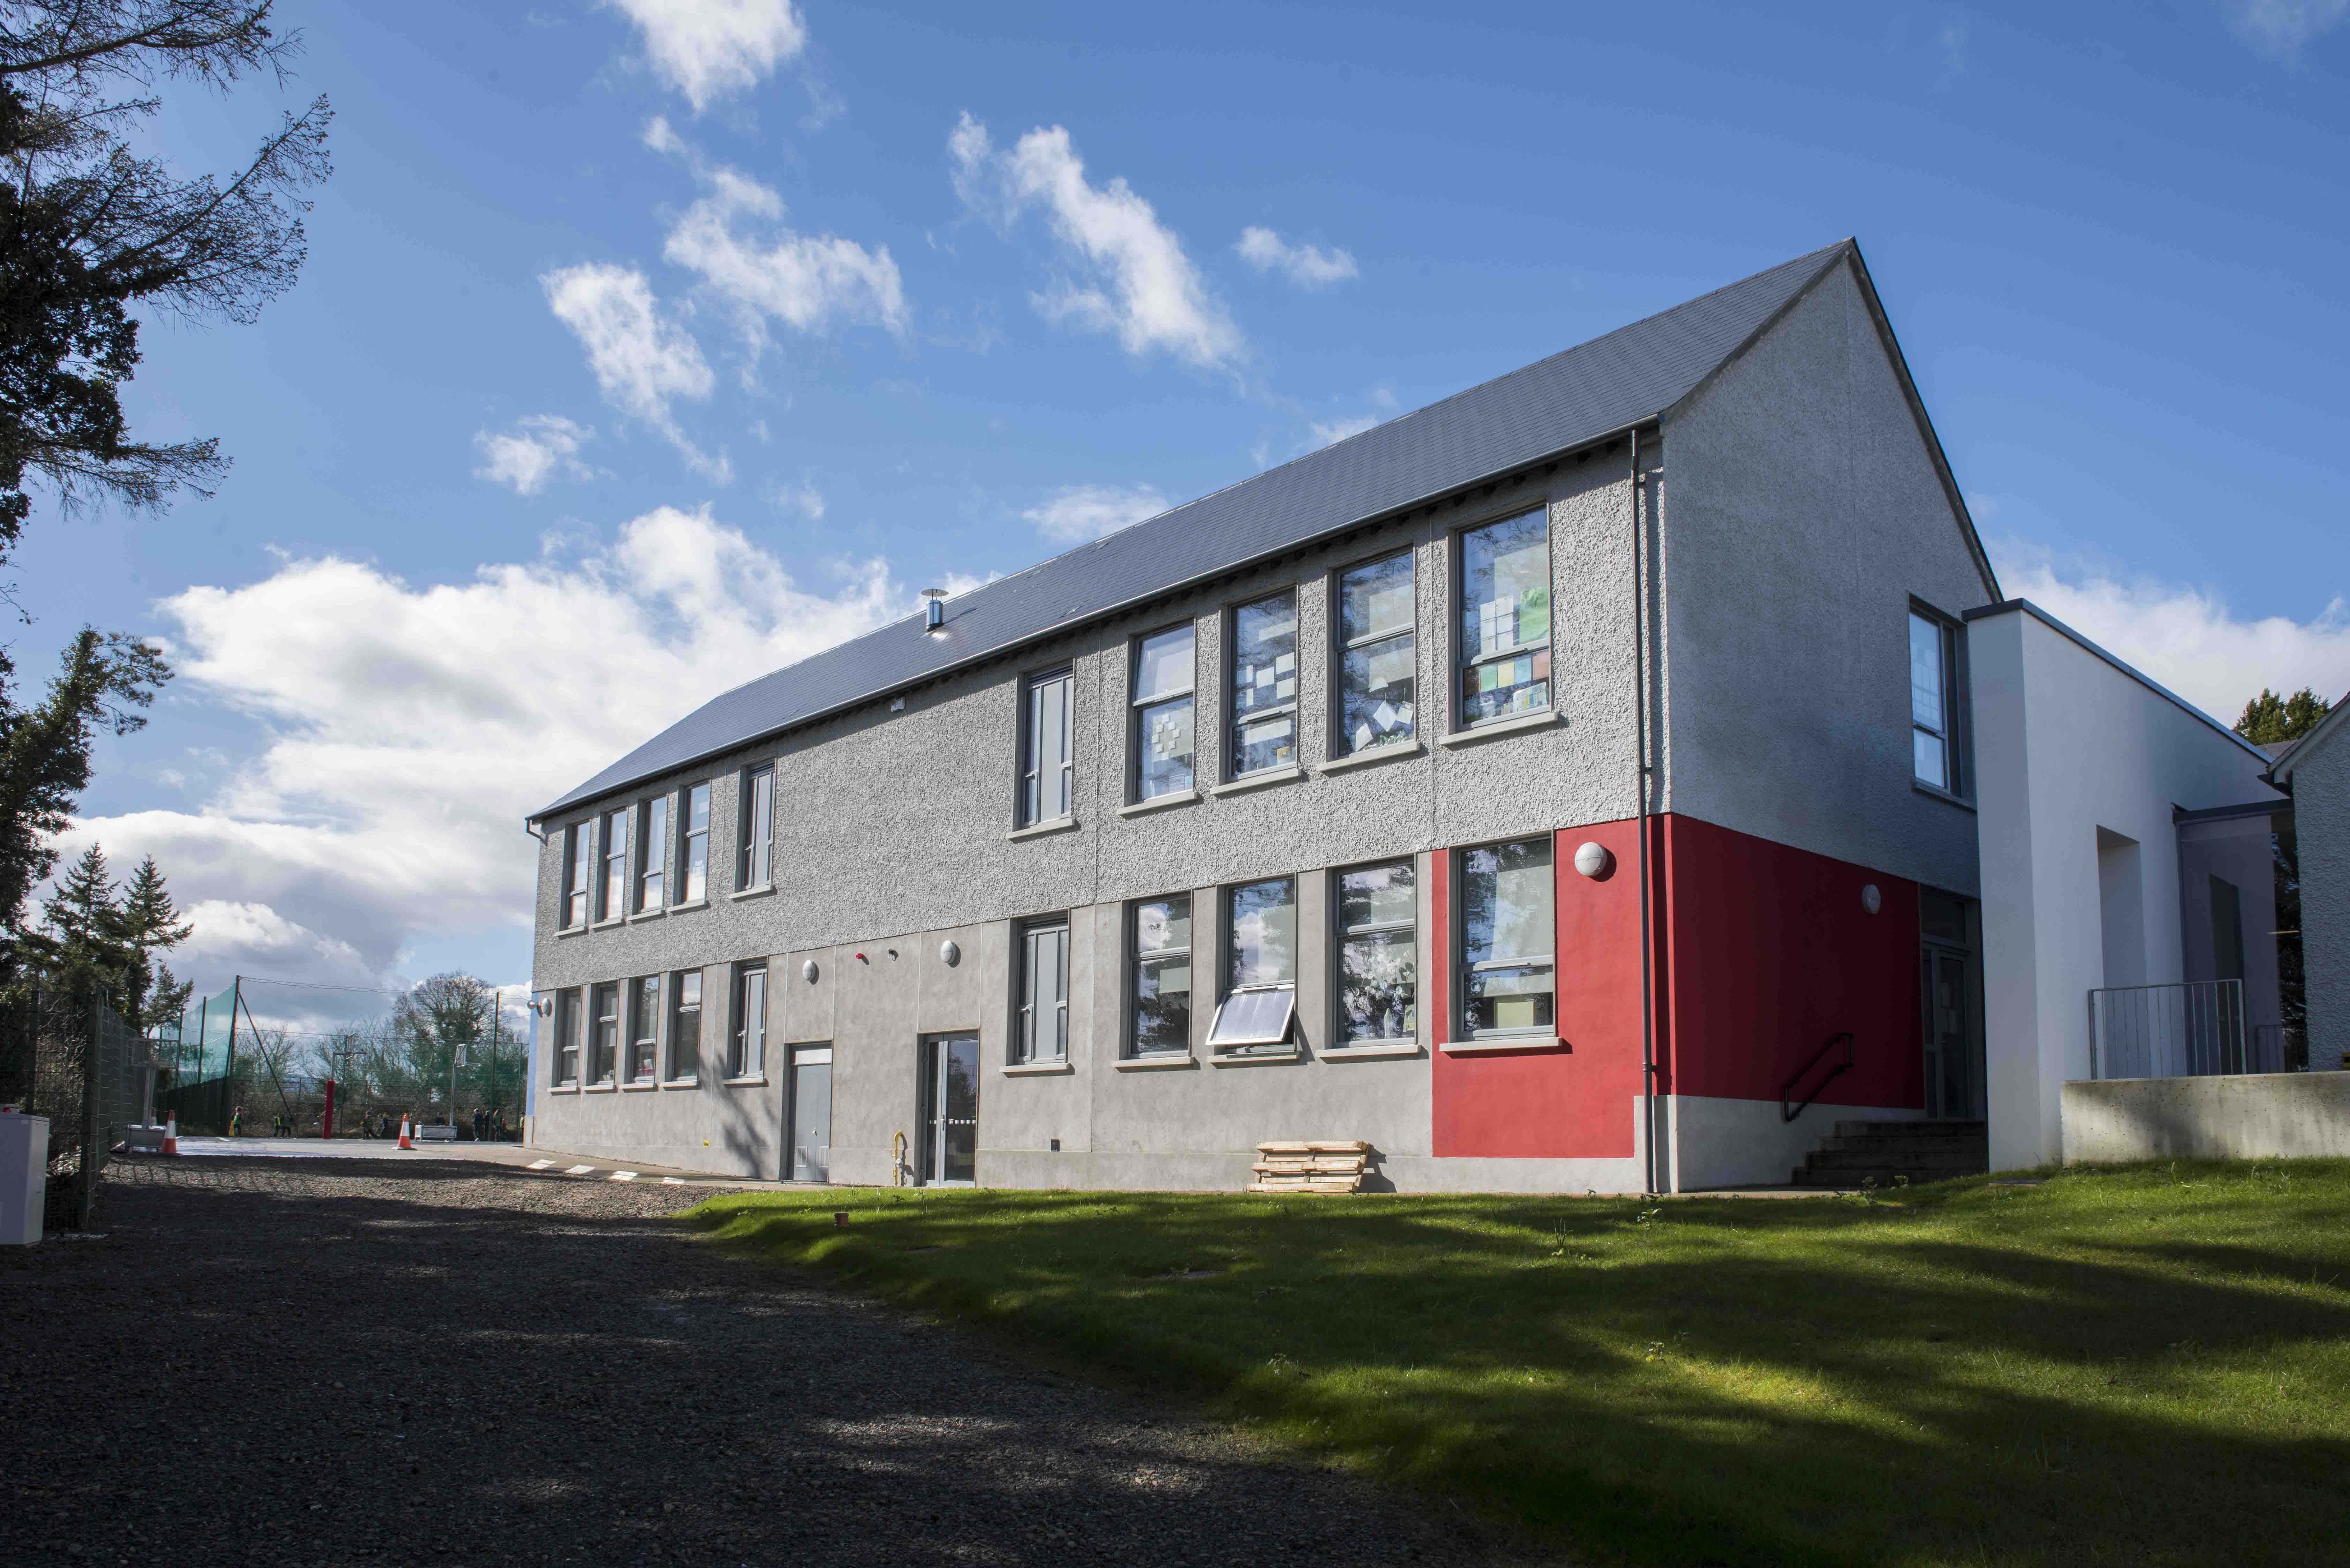 Commission: Carrig National School